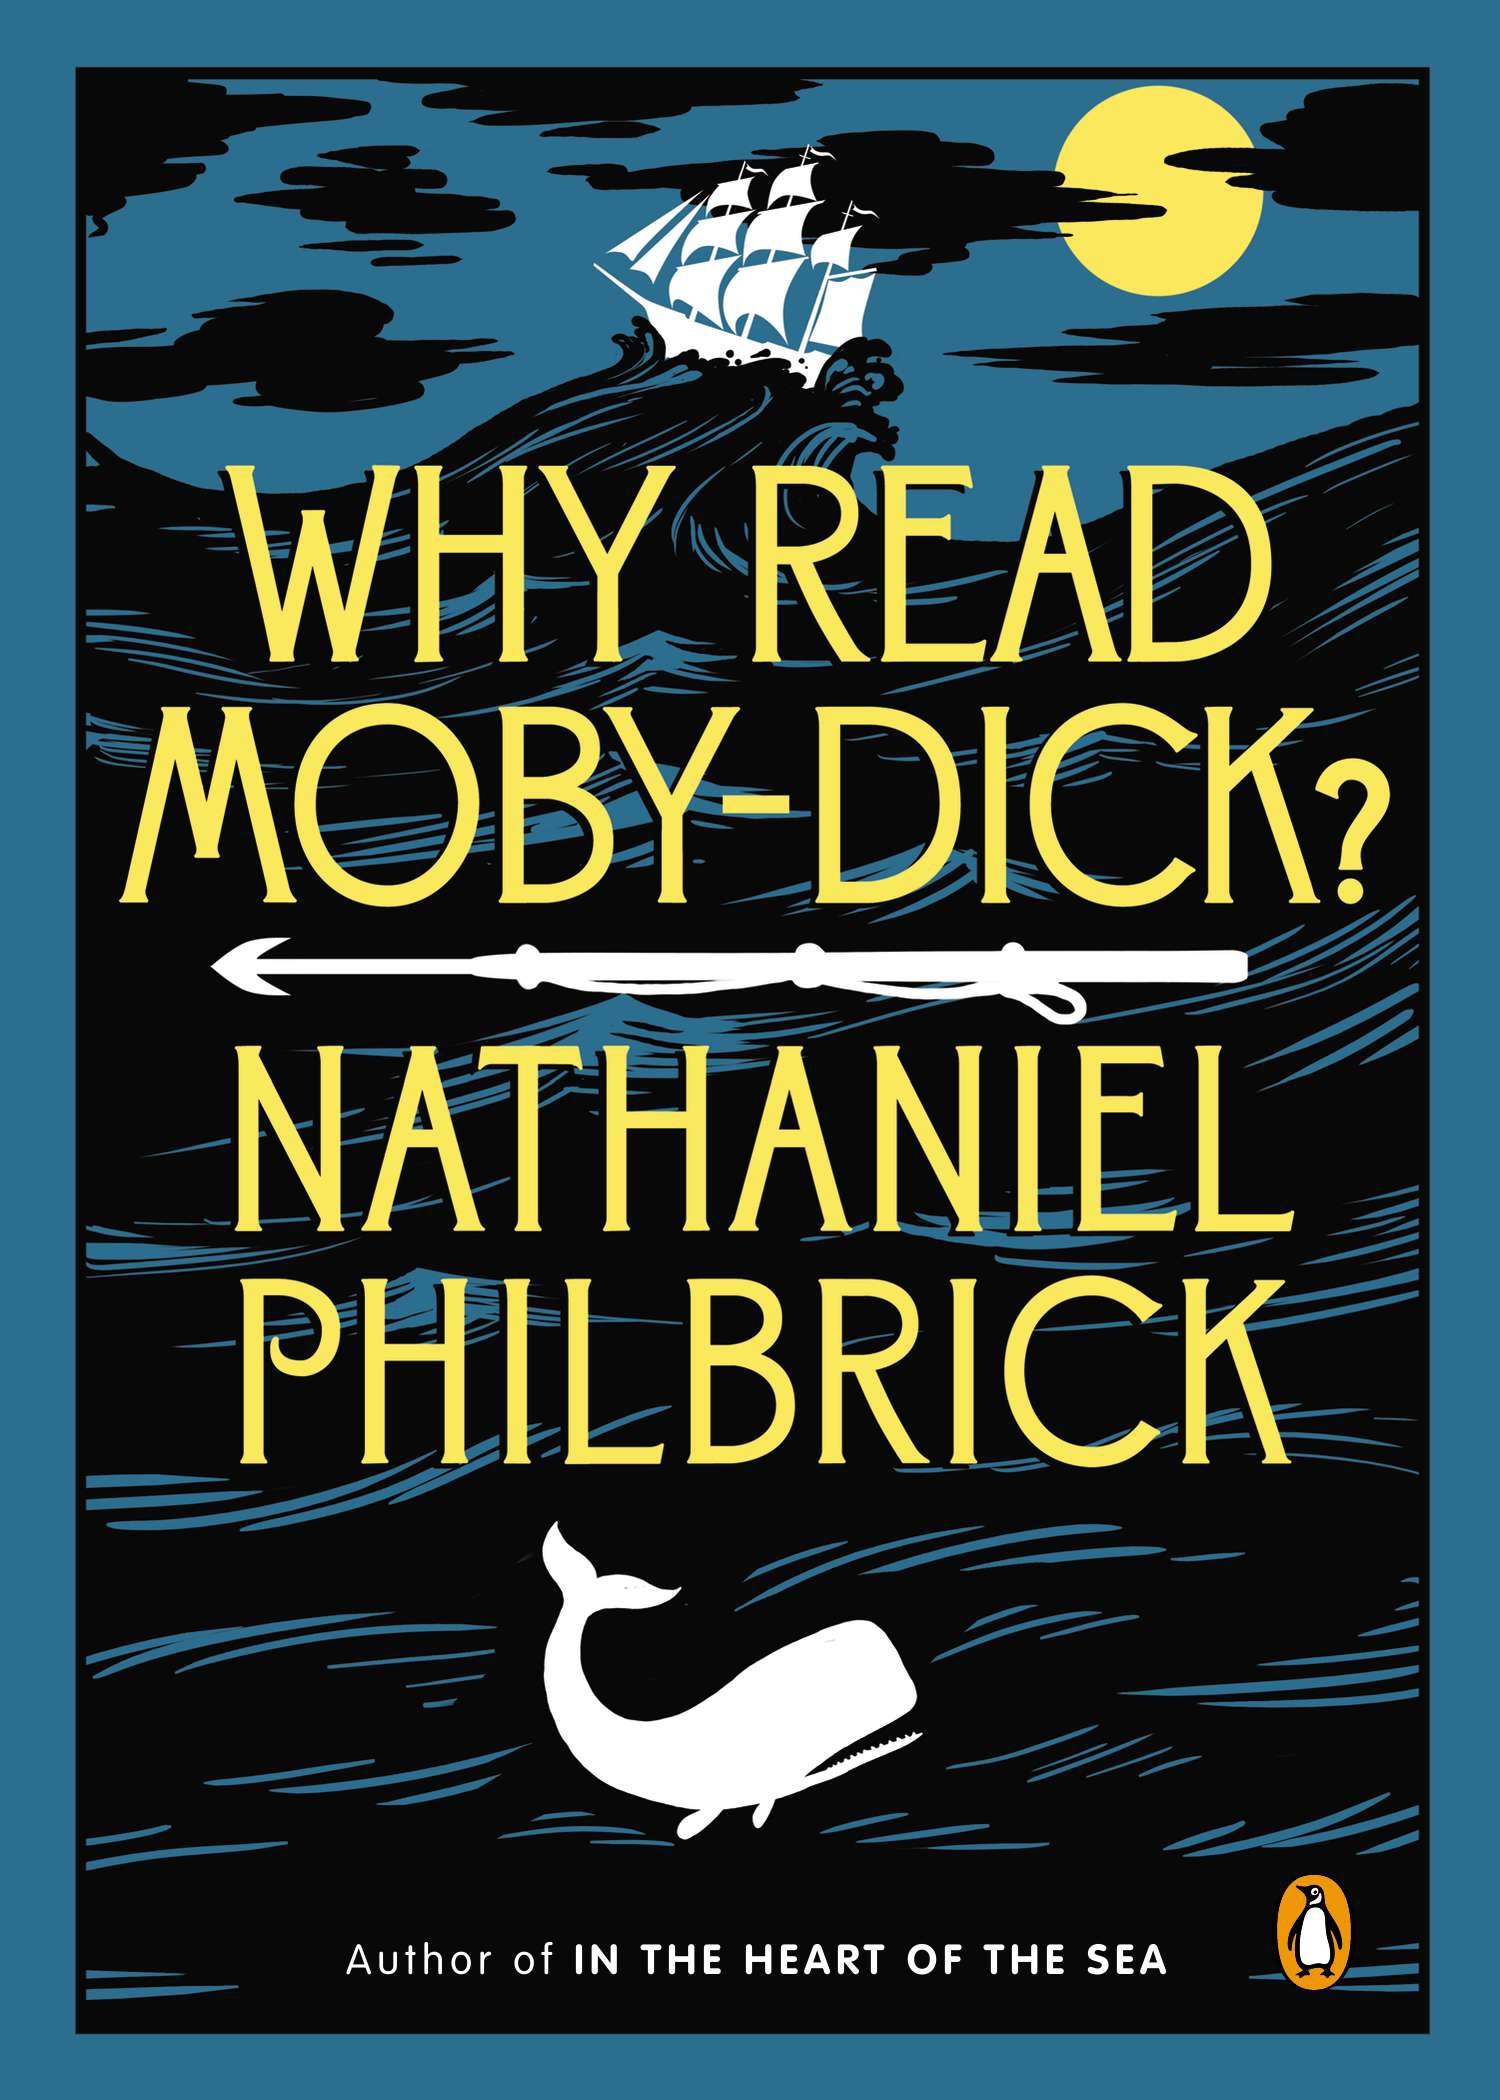 Reading moby dick